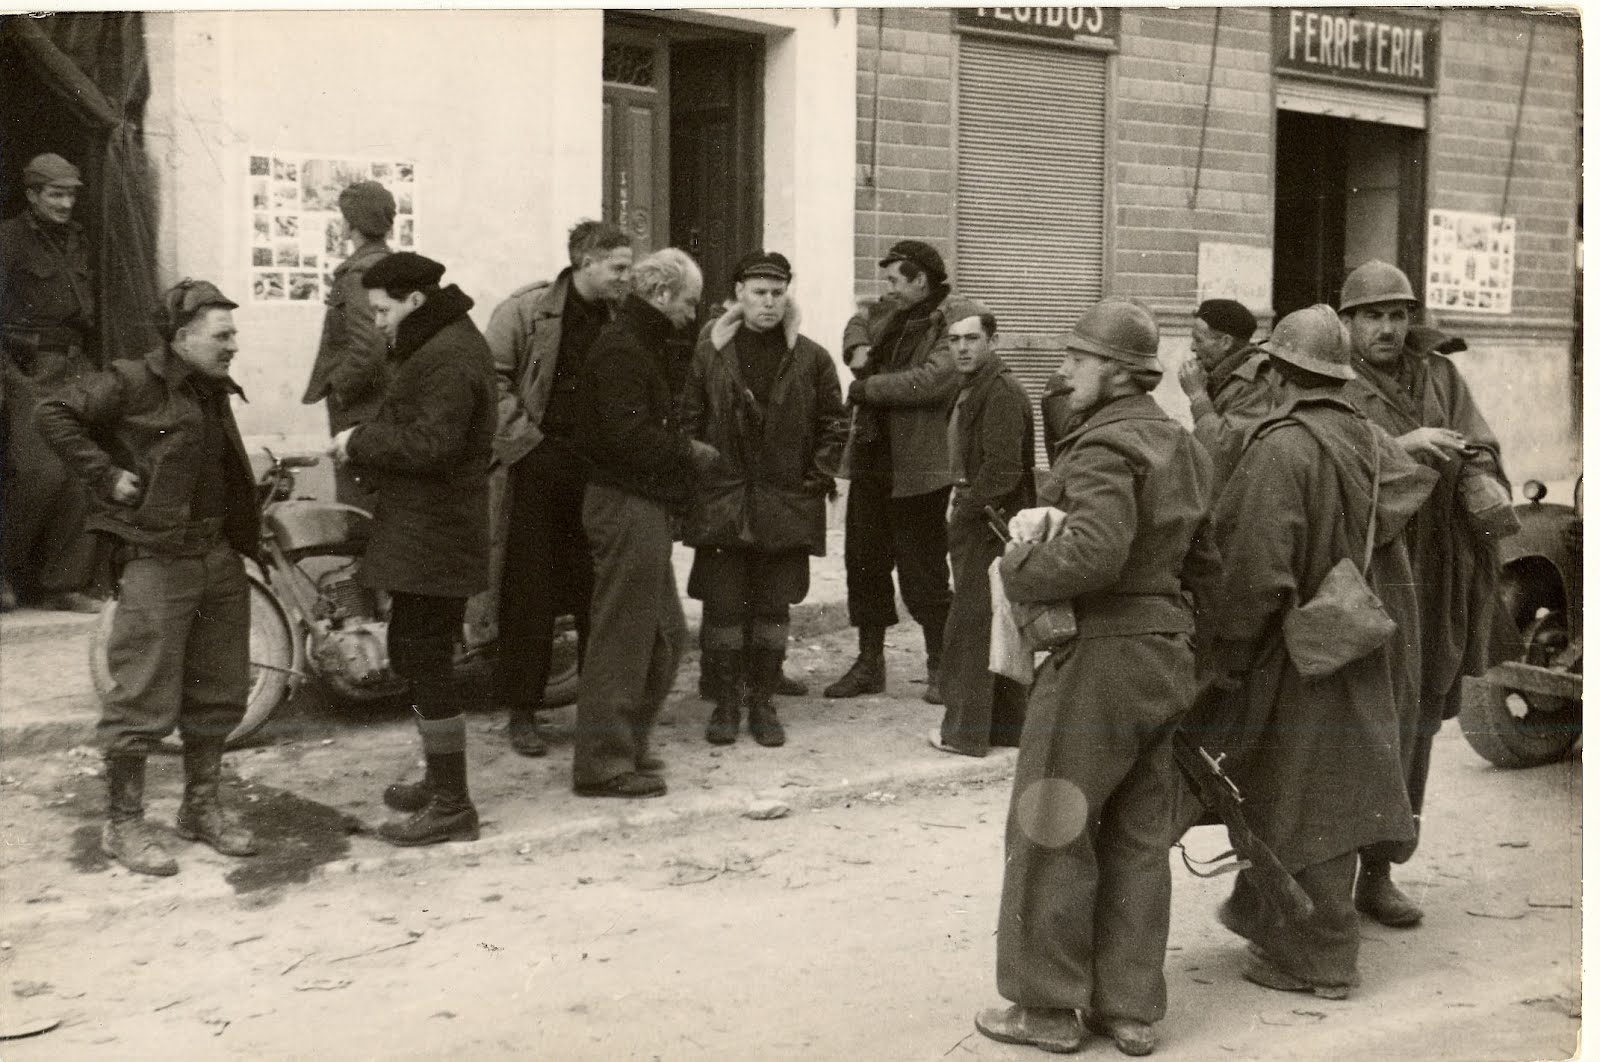 photograph from Spain, men on the street with soldiers